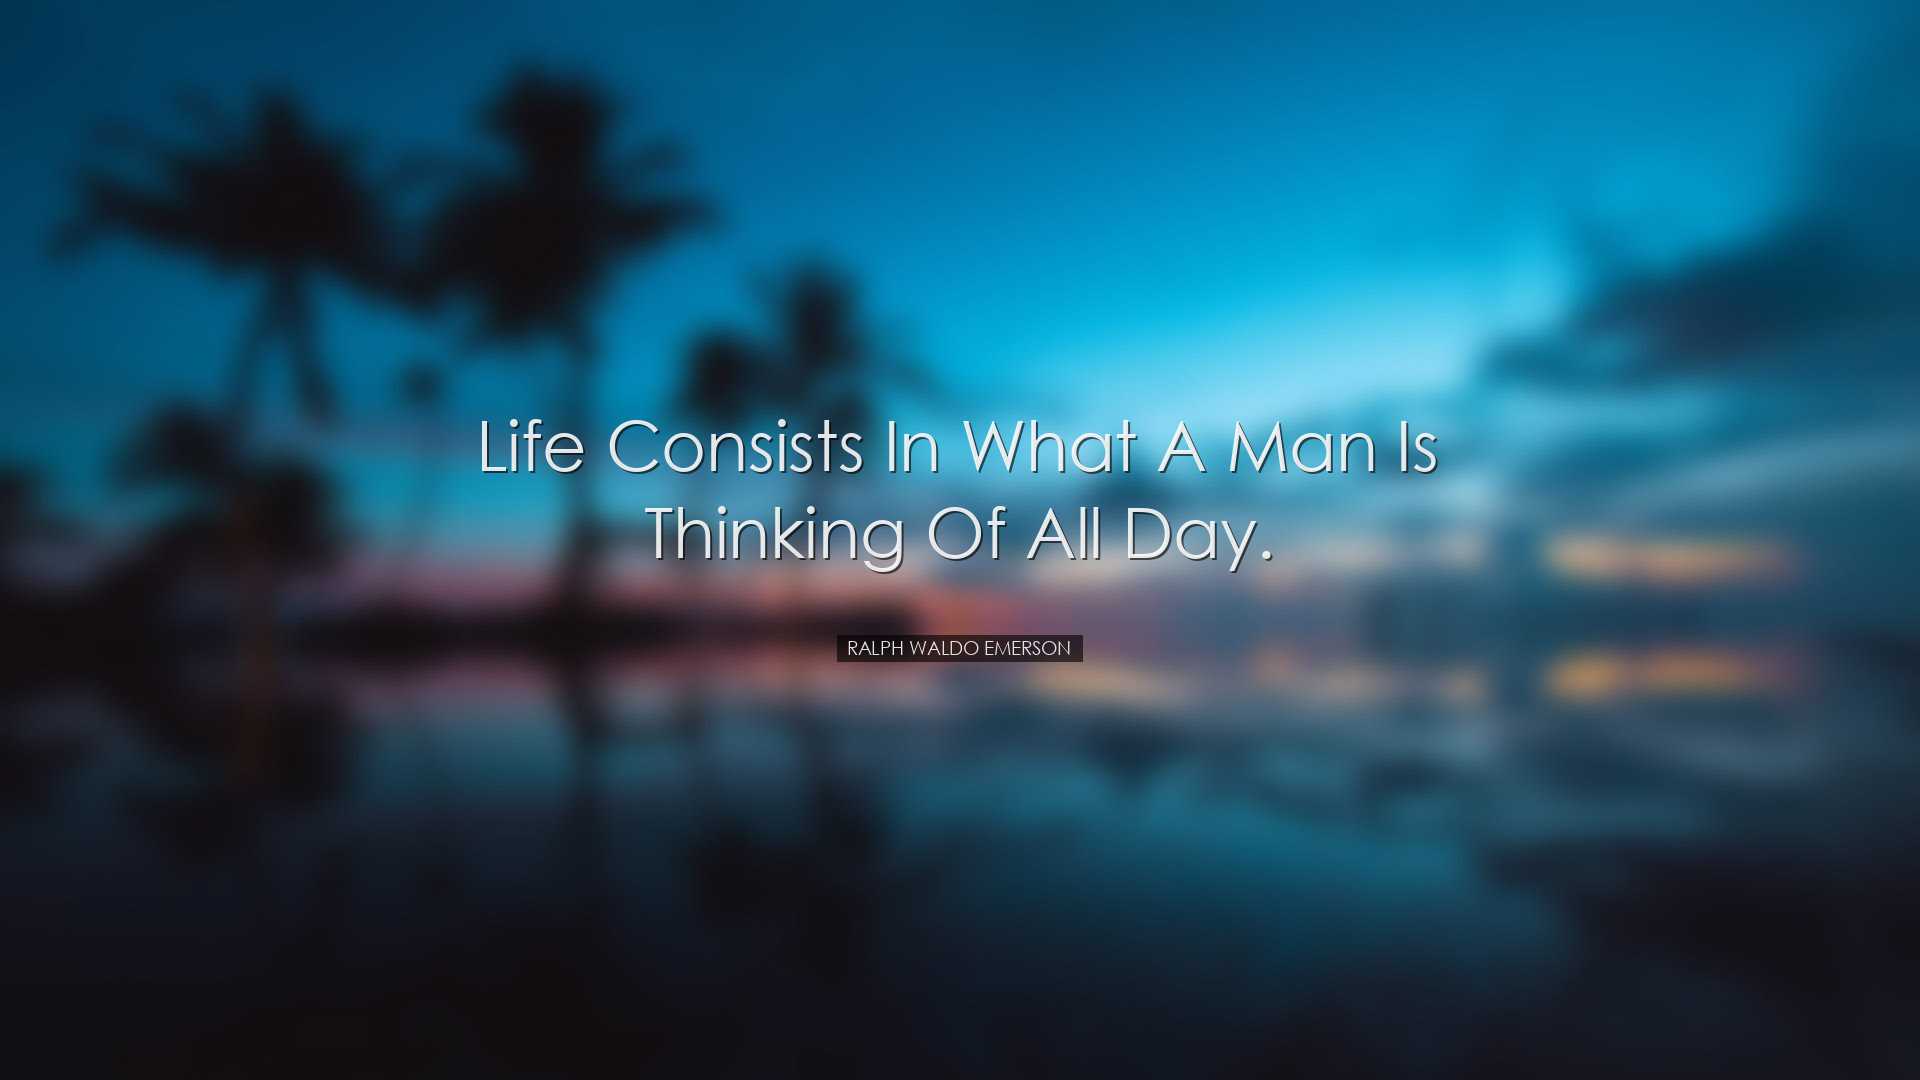 Life consists in what a man is thinking of all day. - Ralph Waldo